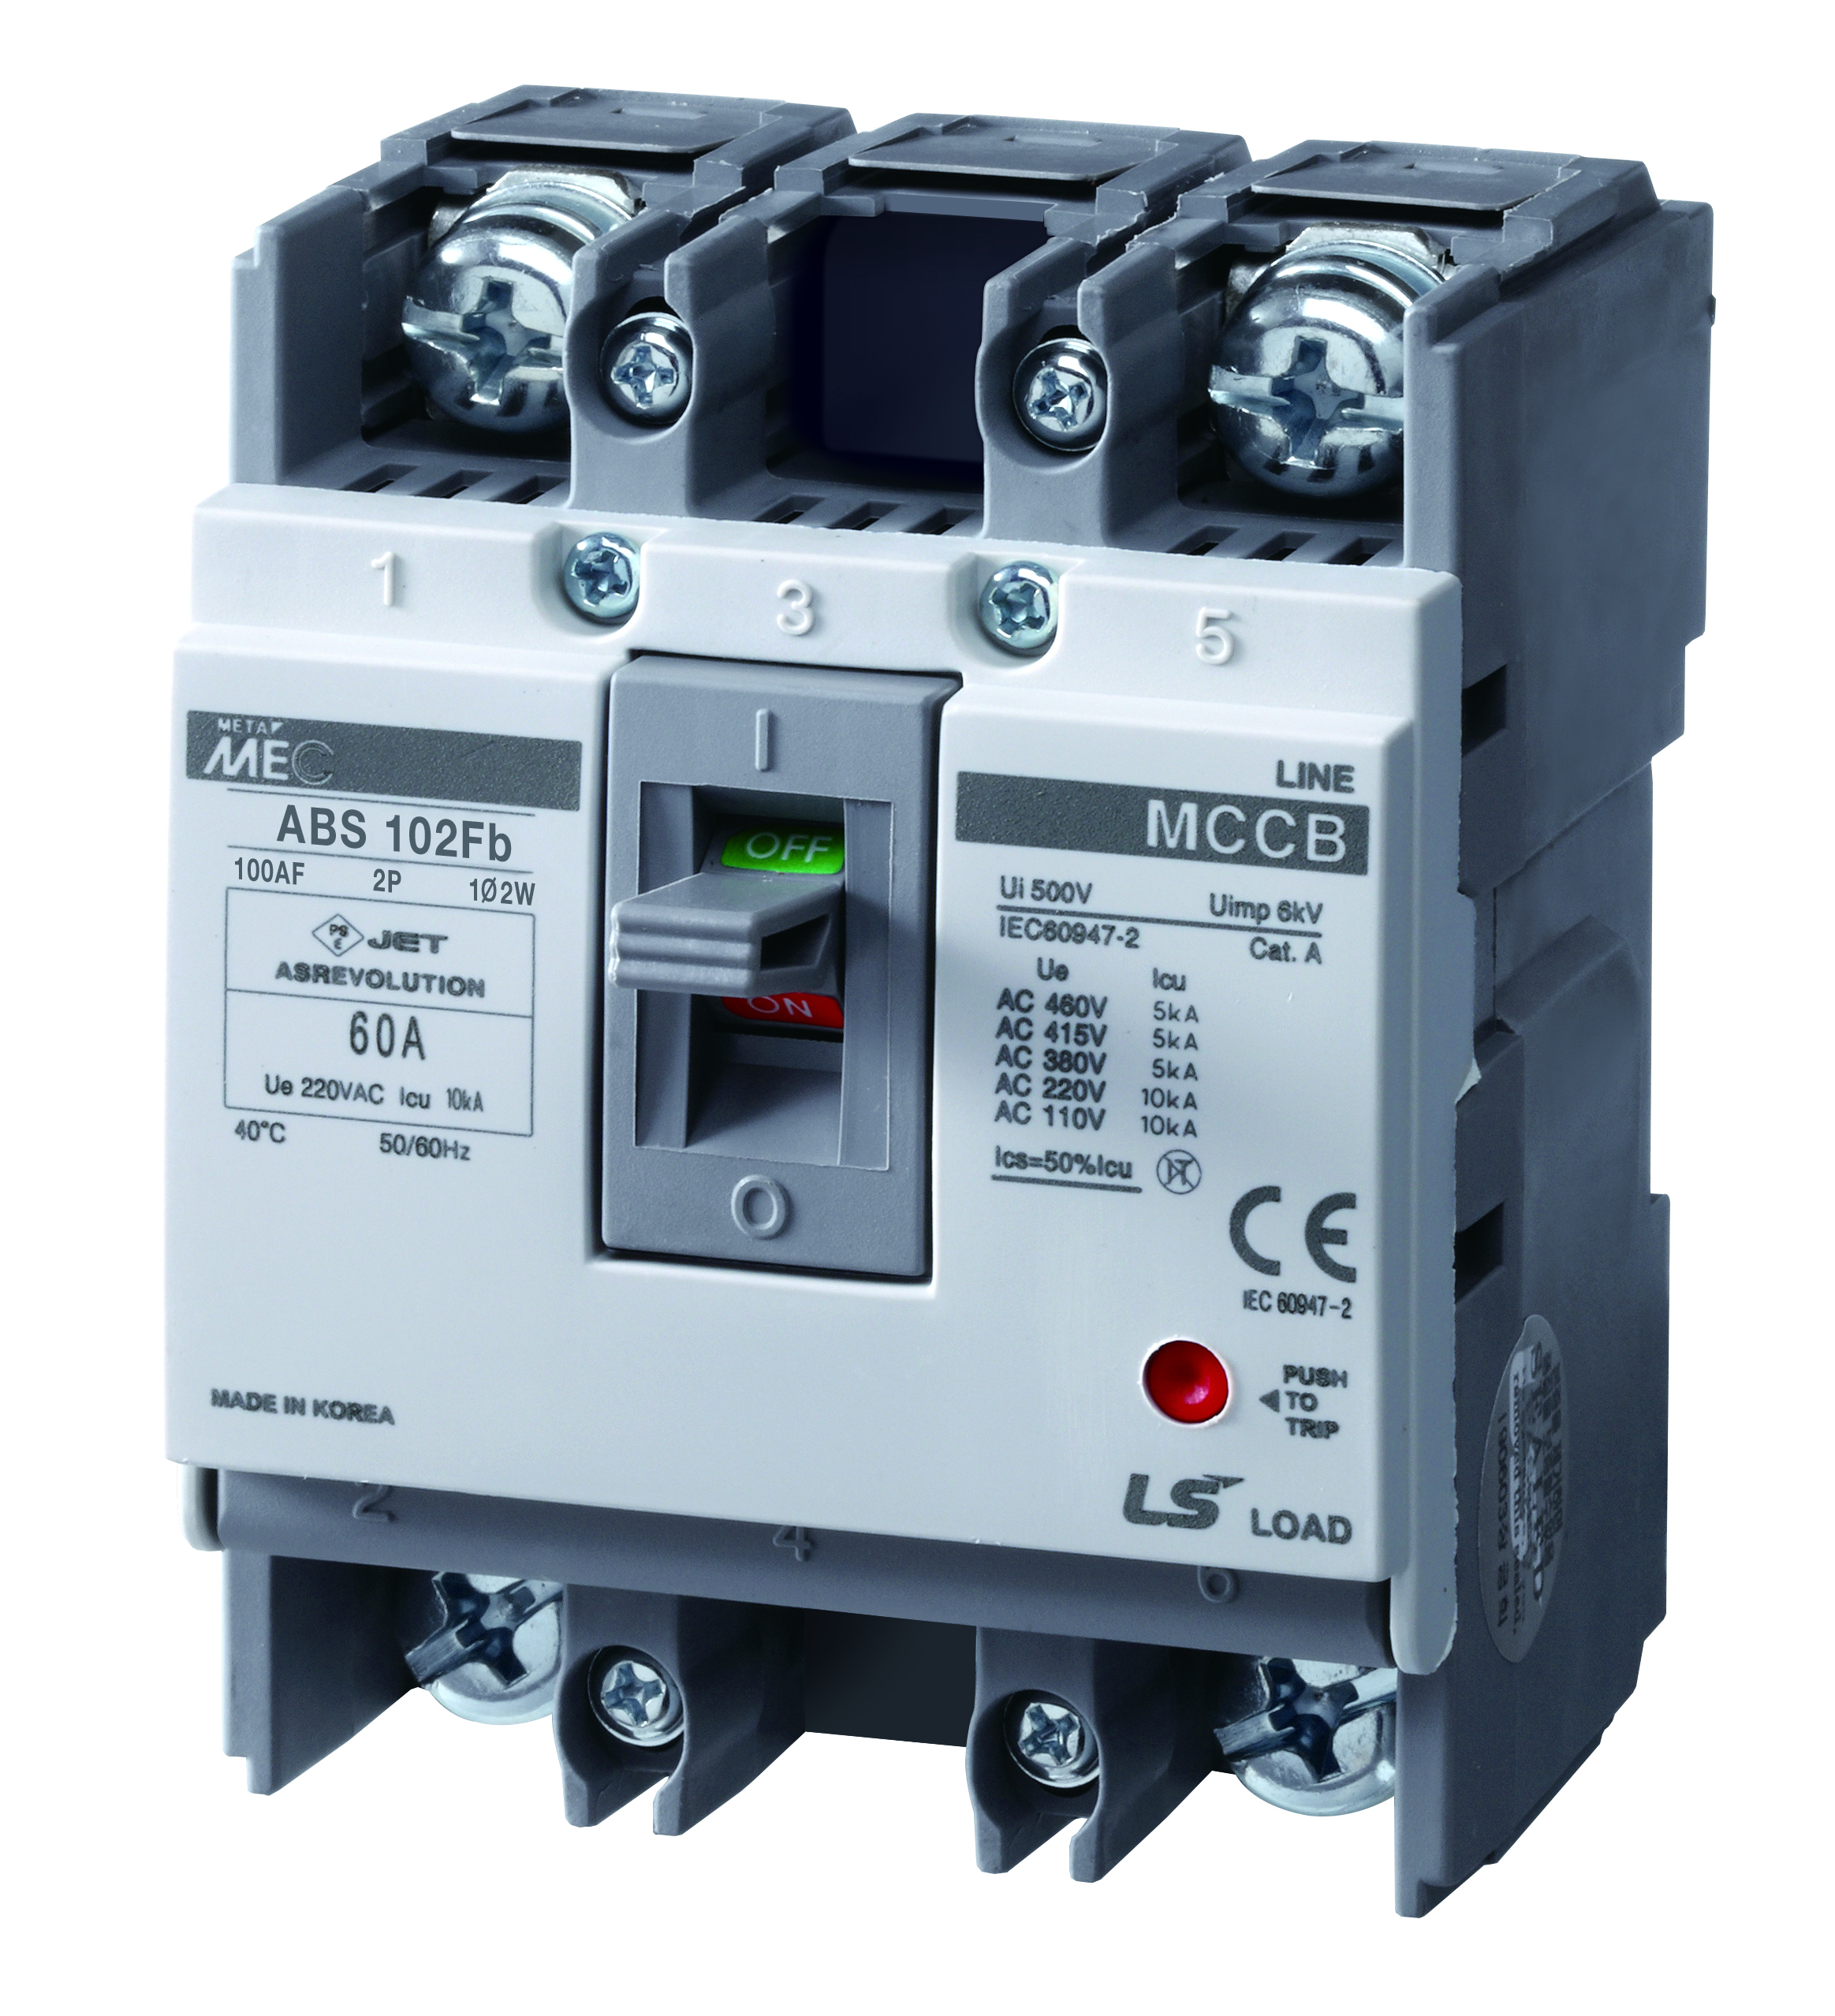 Molded Case Circuit Breakers - Fuseless, ABS Series, DIN Rail Mounting ABS33FB-20A